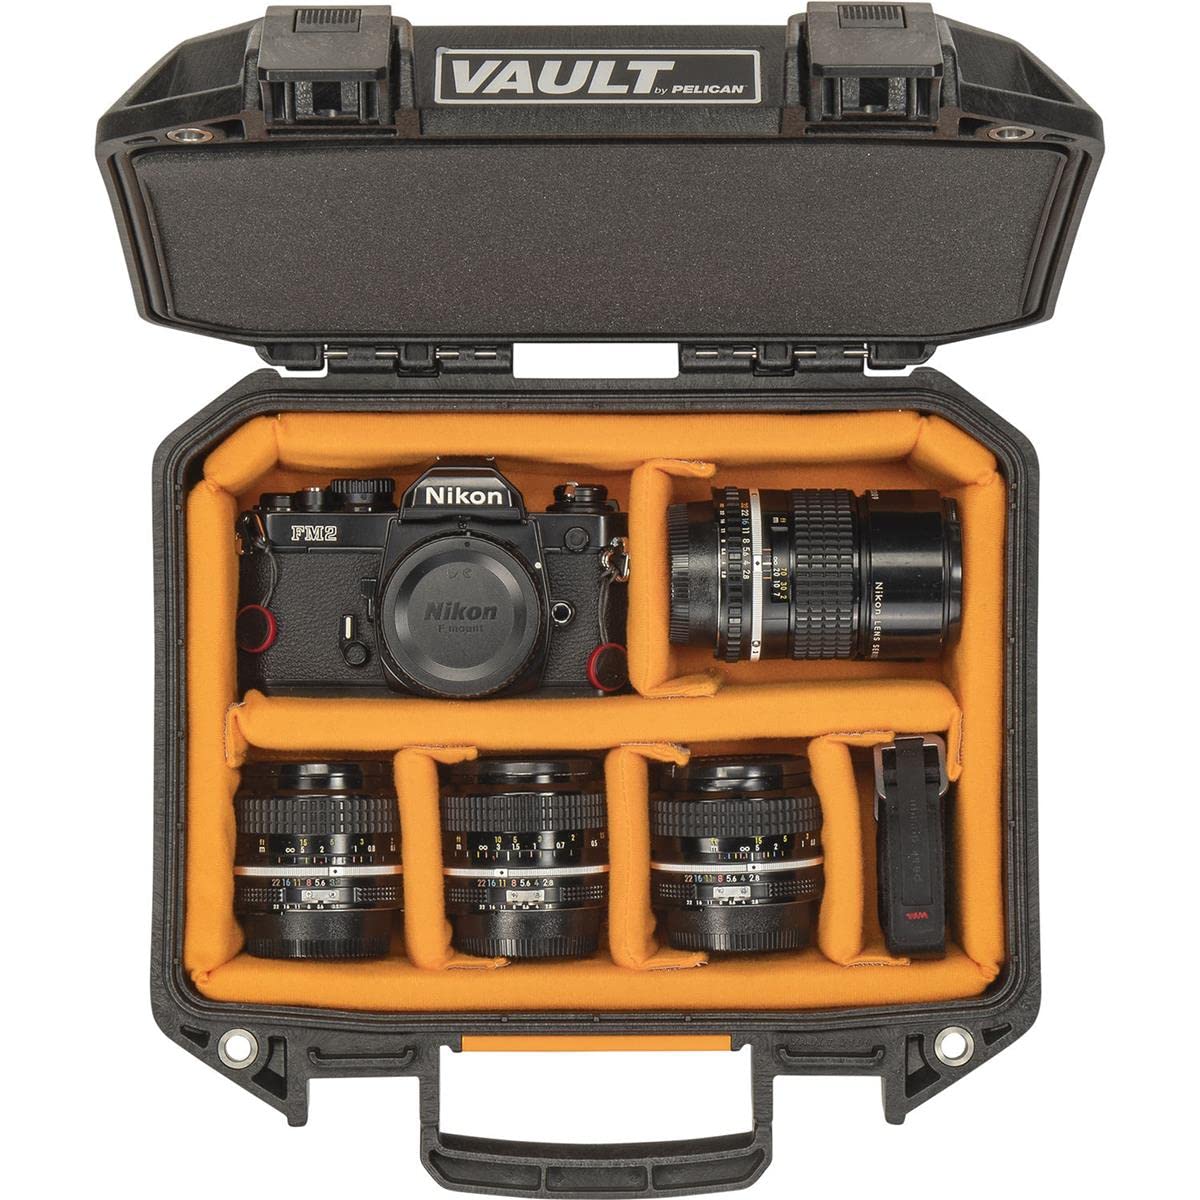 Pelican Vault - V100 Multi-Purpose Hard Case with Padded Dividers for Camera, Drone, Equipment, Electronics, and Gear (Black)